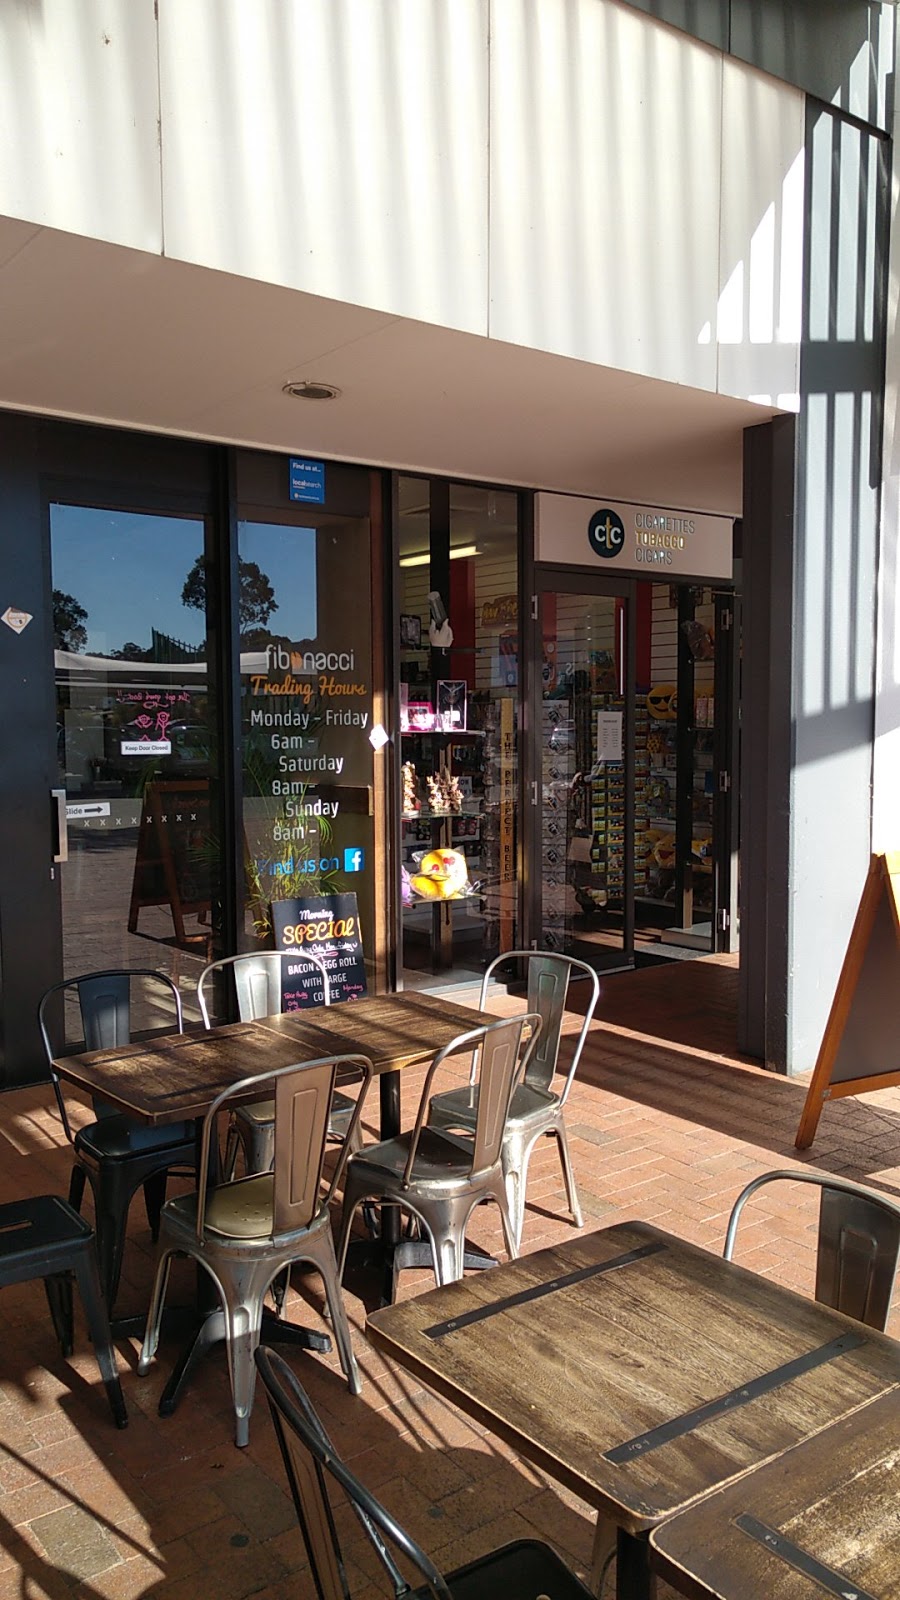 CTC Muswellbrook | store | shop 7/21 Rutherford Rd, Muswellbrook NSW 2333, Australia | 0265415670 OR +61 2 6541 5670